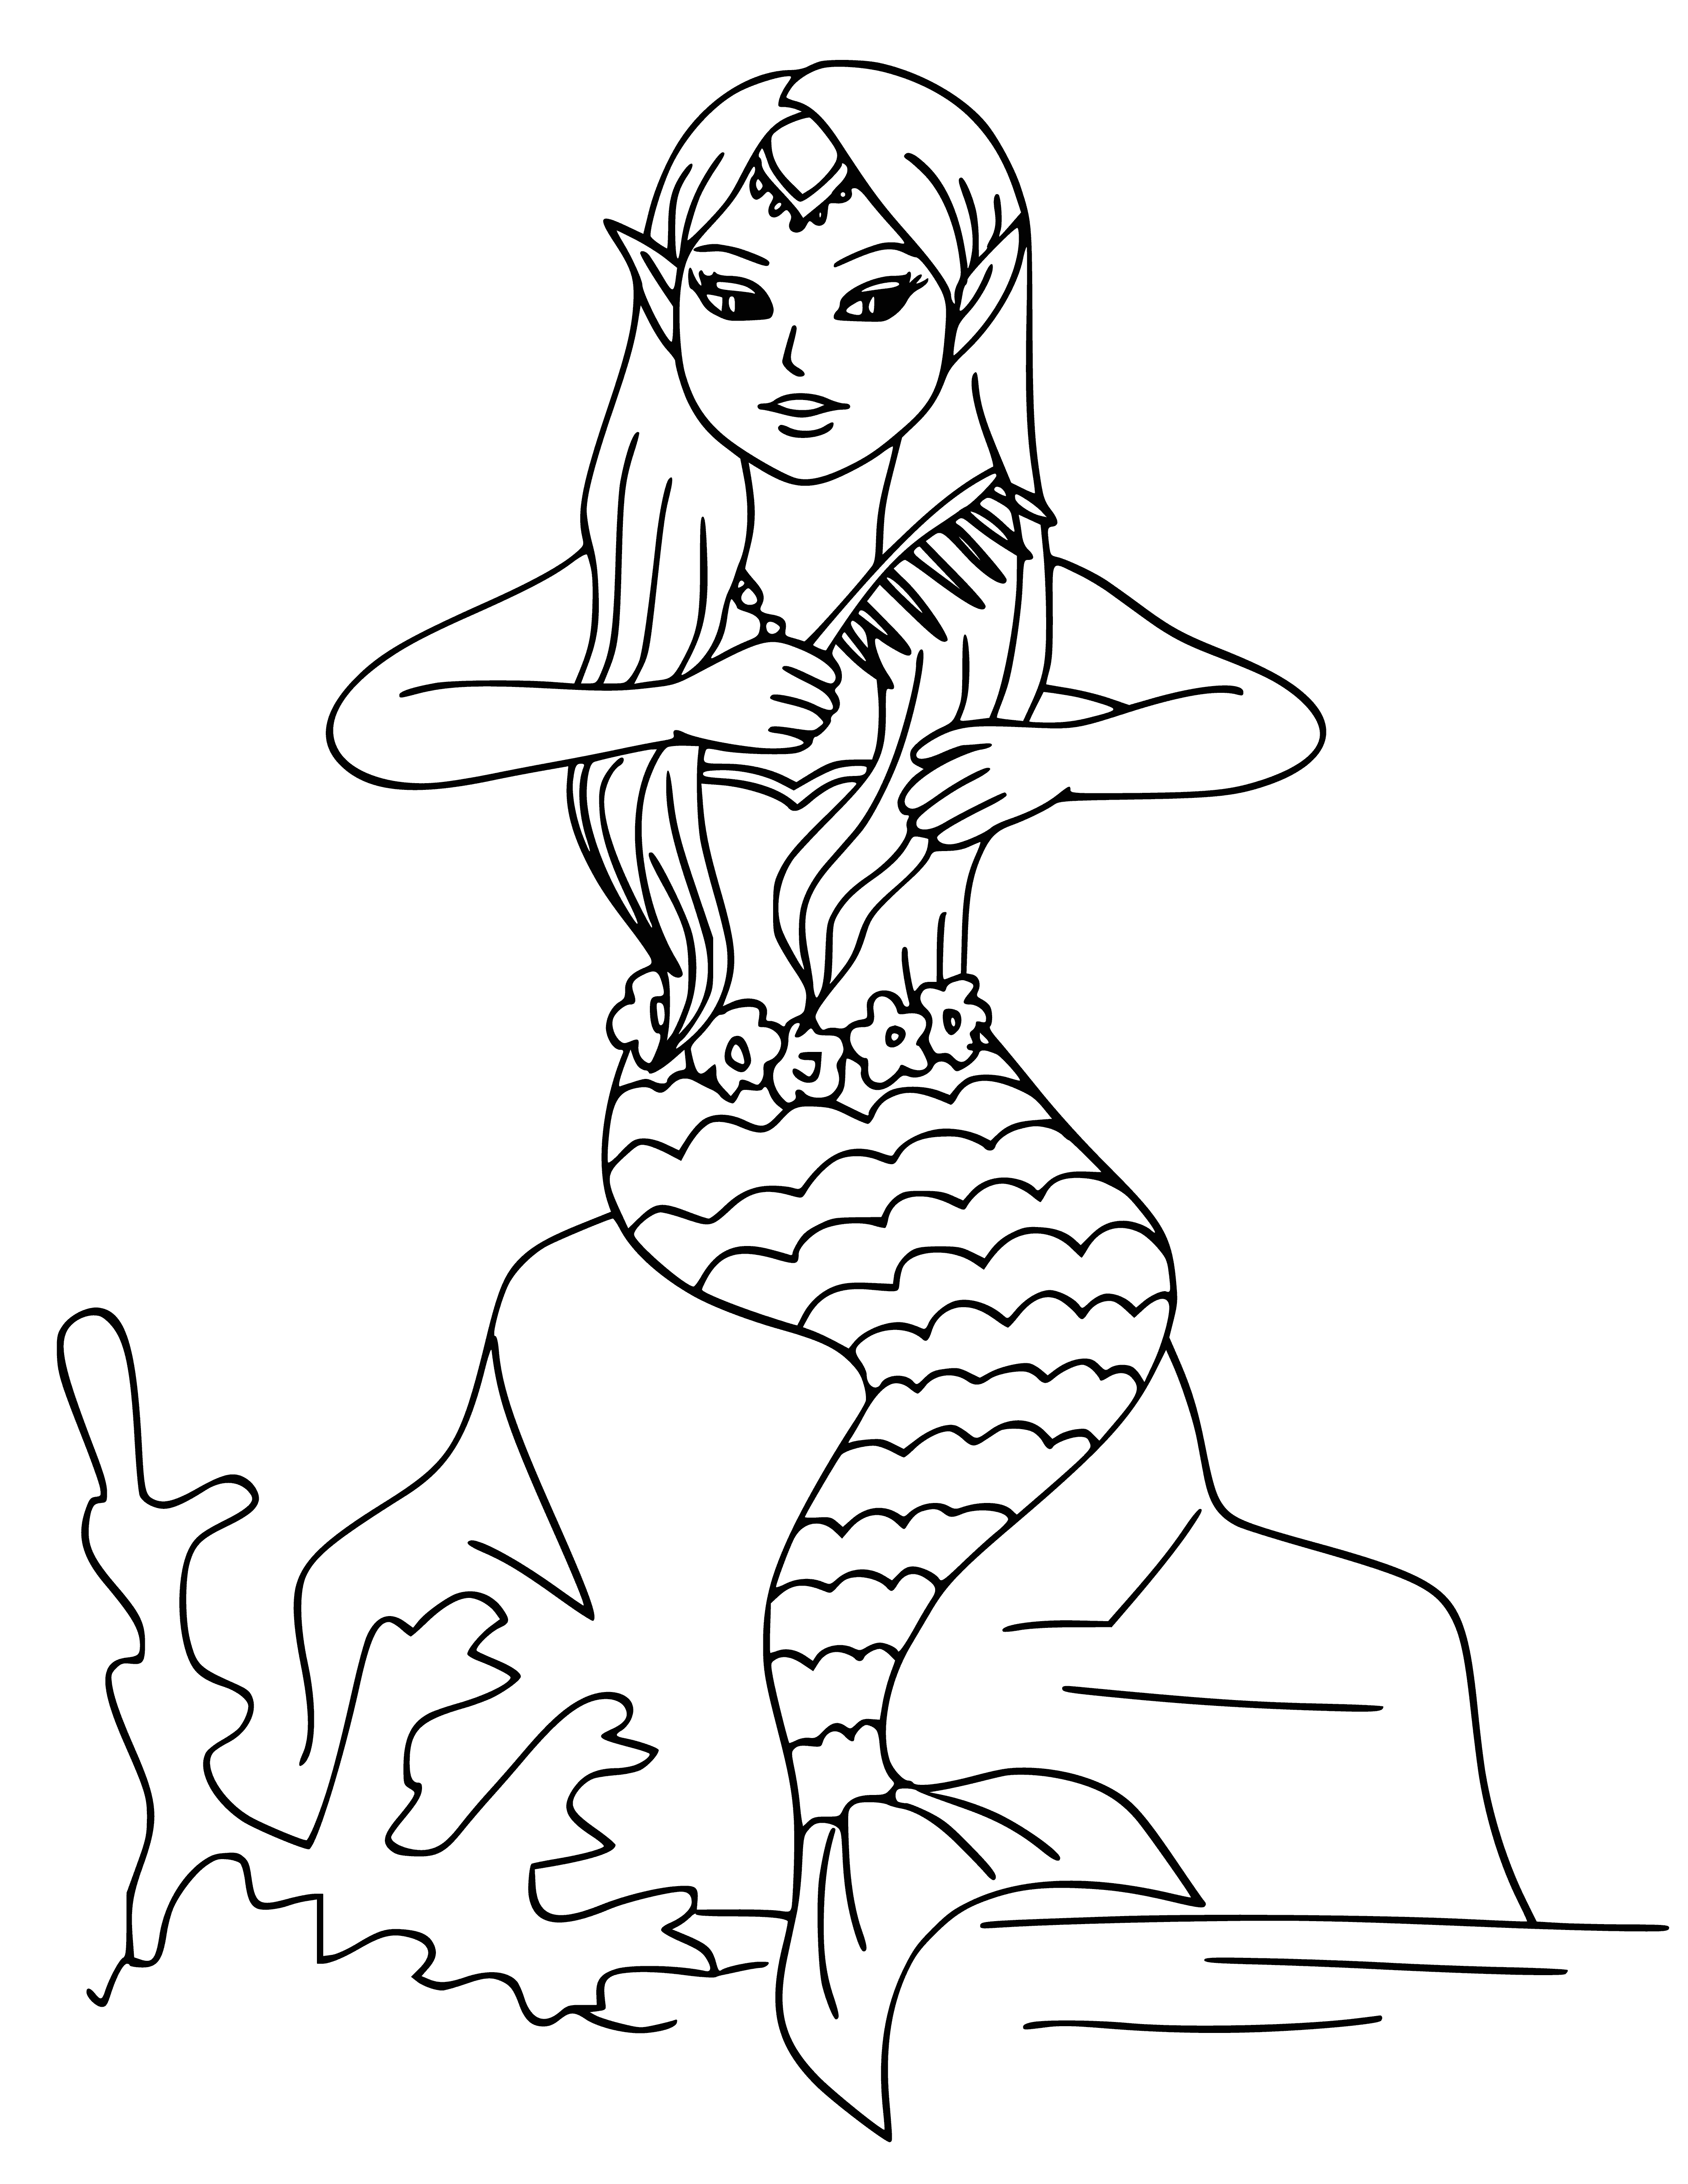 coloring page: Mermaid combs her long, golden hair with a pearl comb; wears a jeweled crown & pearl necklace.